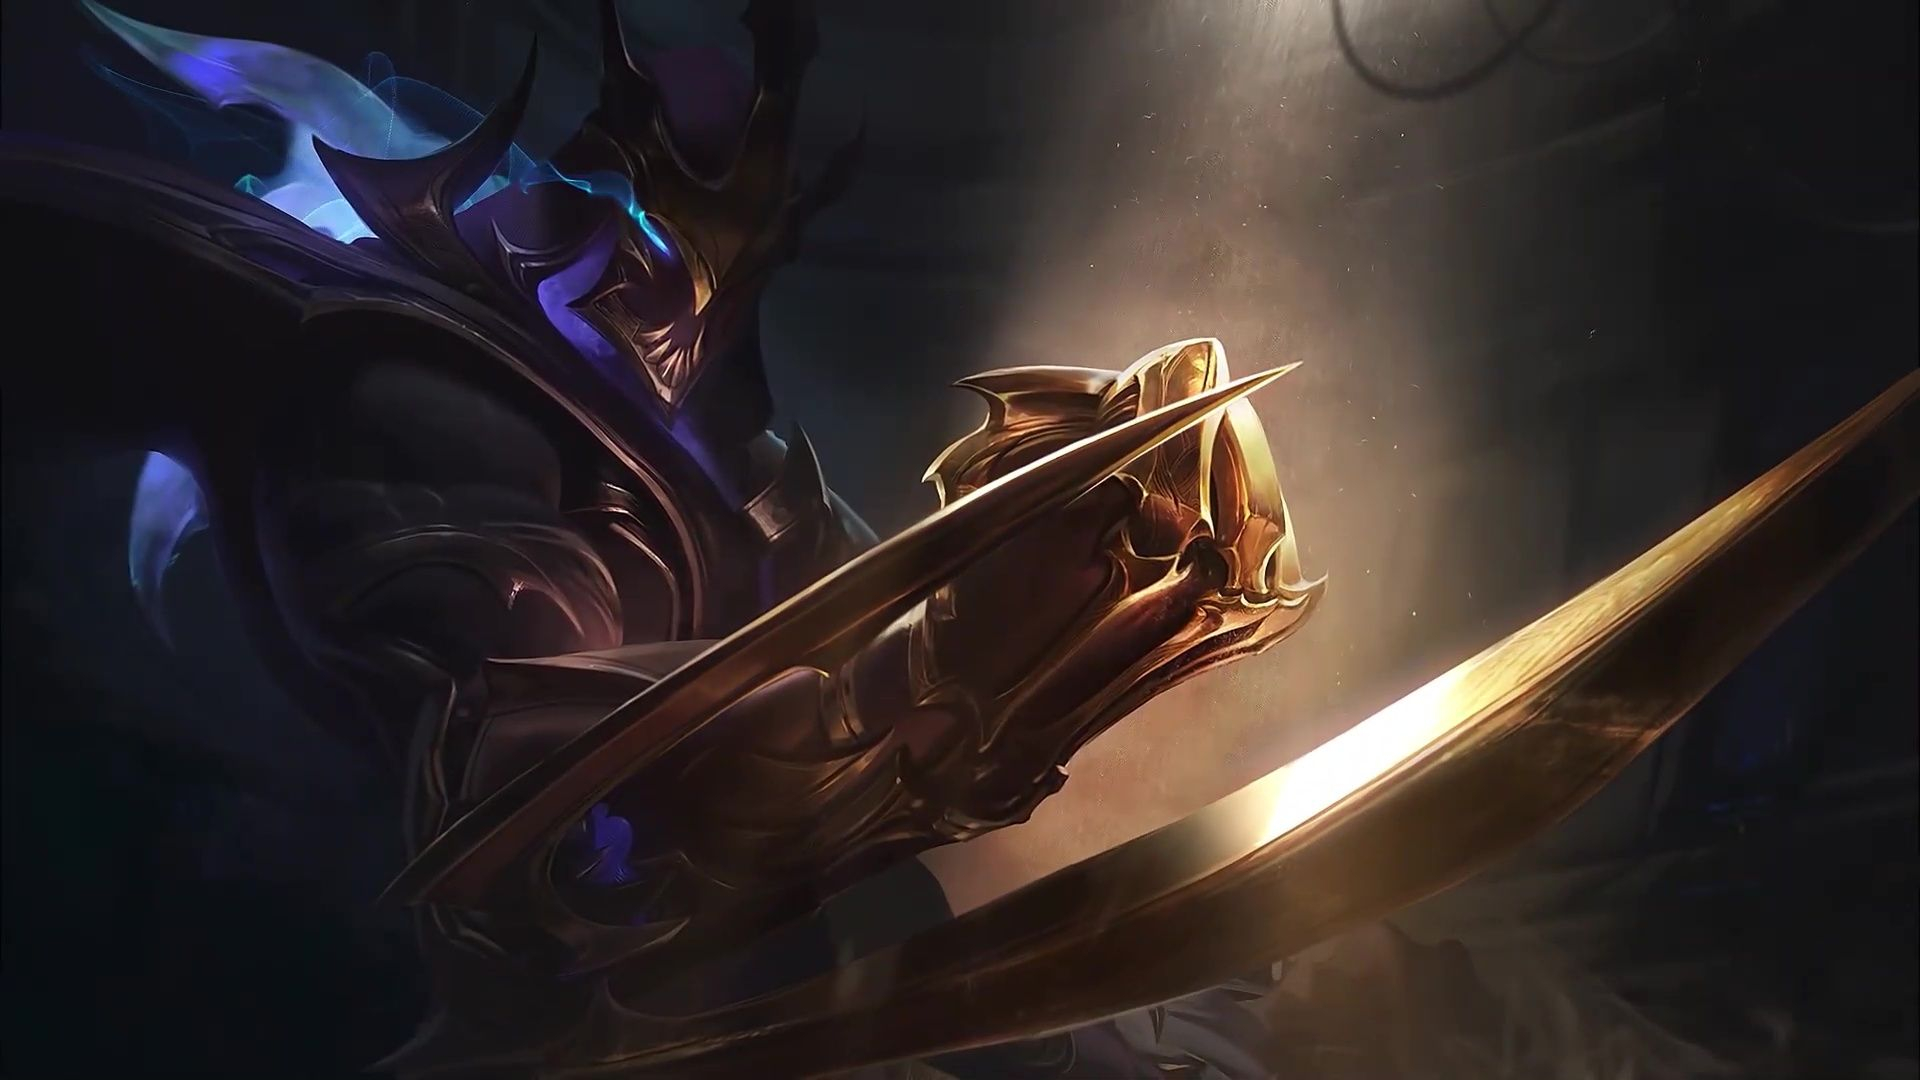 1920x1080 Galaxy Slayer Zed League Of Legends Live Wallpaper | League of legends live, League of legends, Live wallpapers